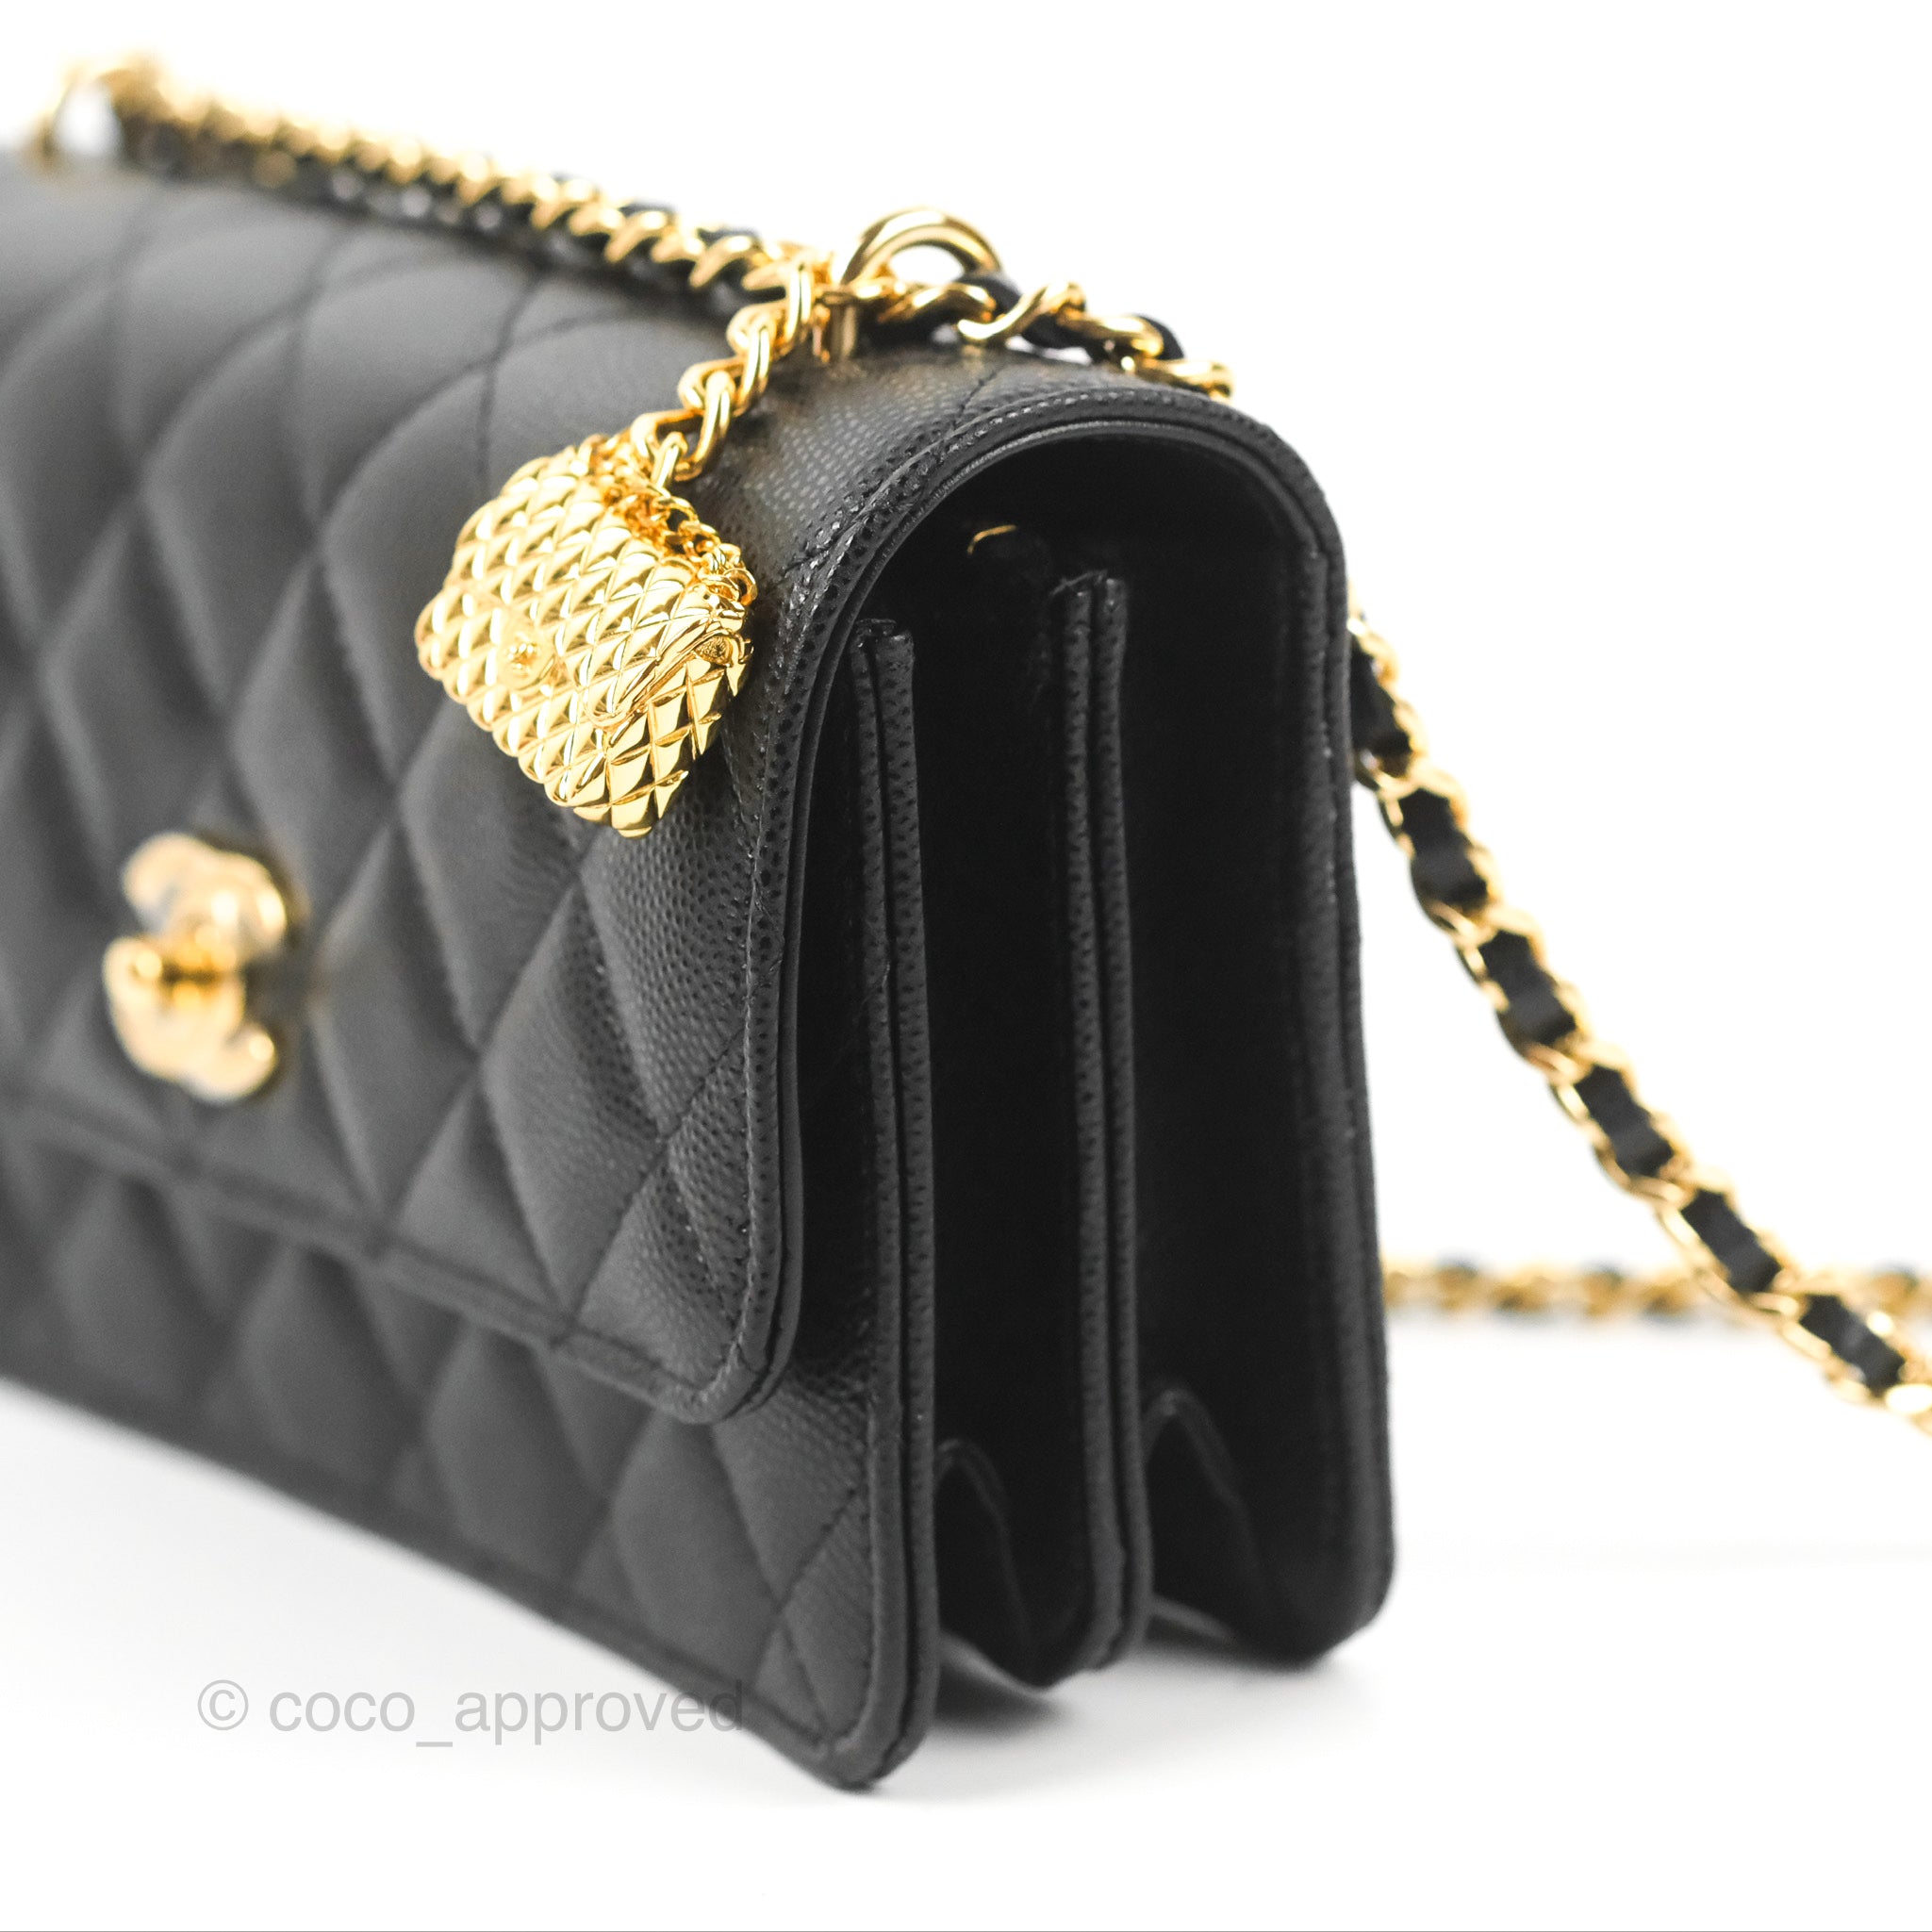 chanel bag chain with ball